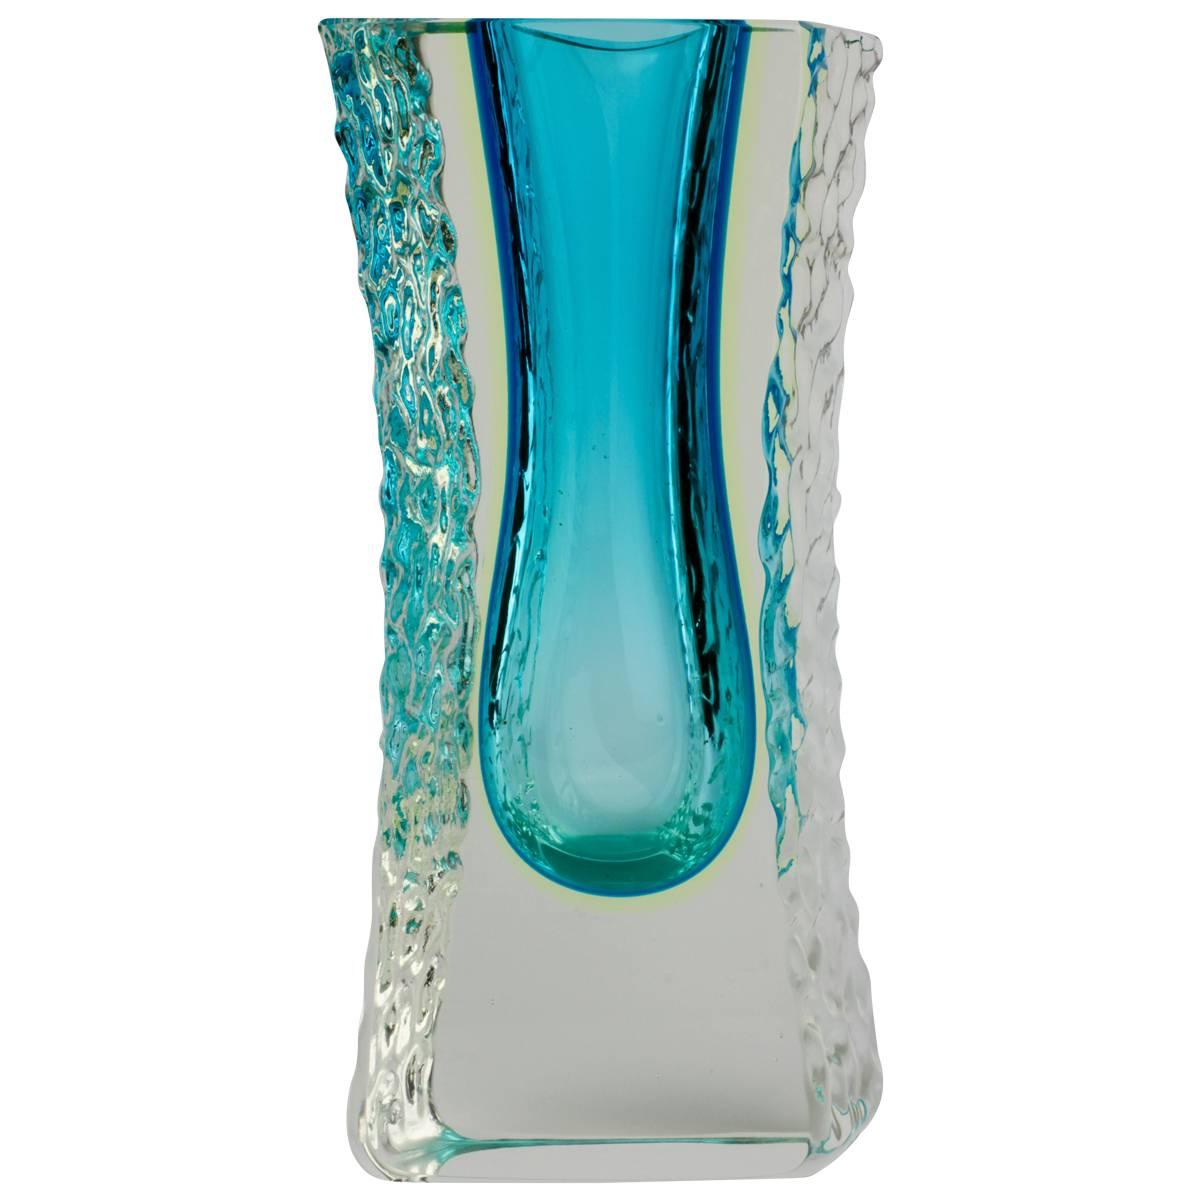 A beautiful midcentury Murano art glass vase attributed to Mandruzzato, circa 1980s. The combination of ocean blue and the textured clear 'Sommerso' ice glass looks simply stunning.

This is a rare color and size, a must have for any